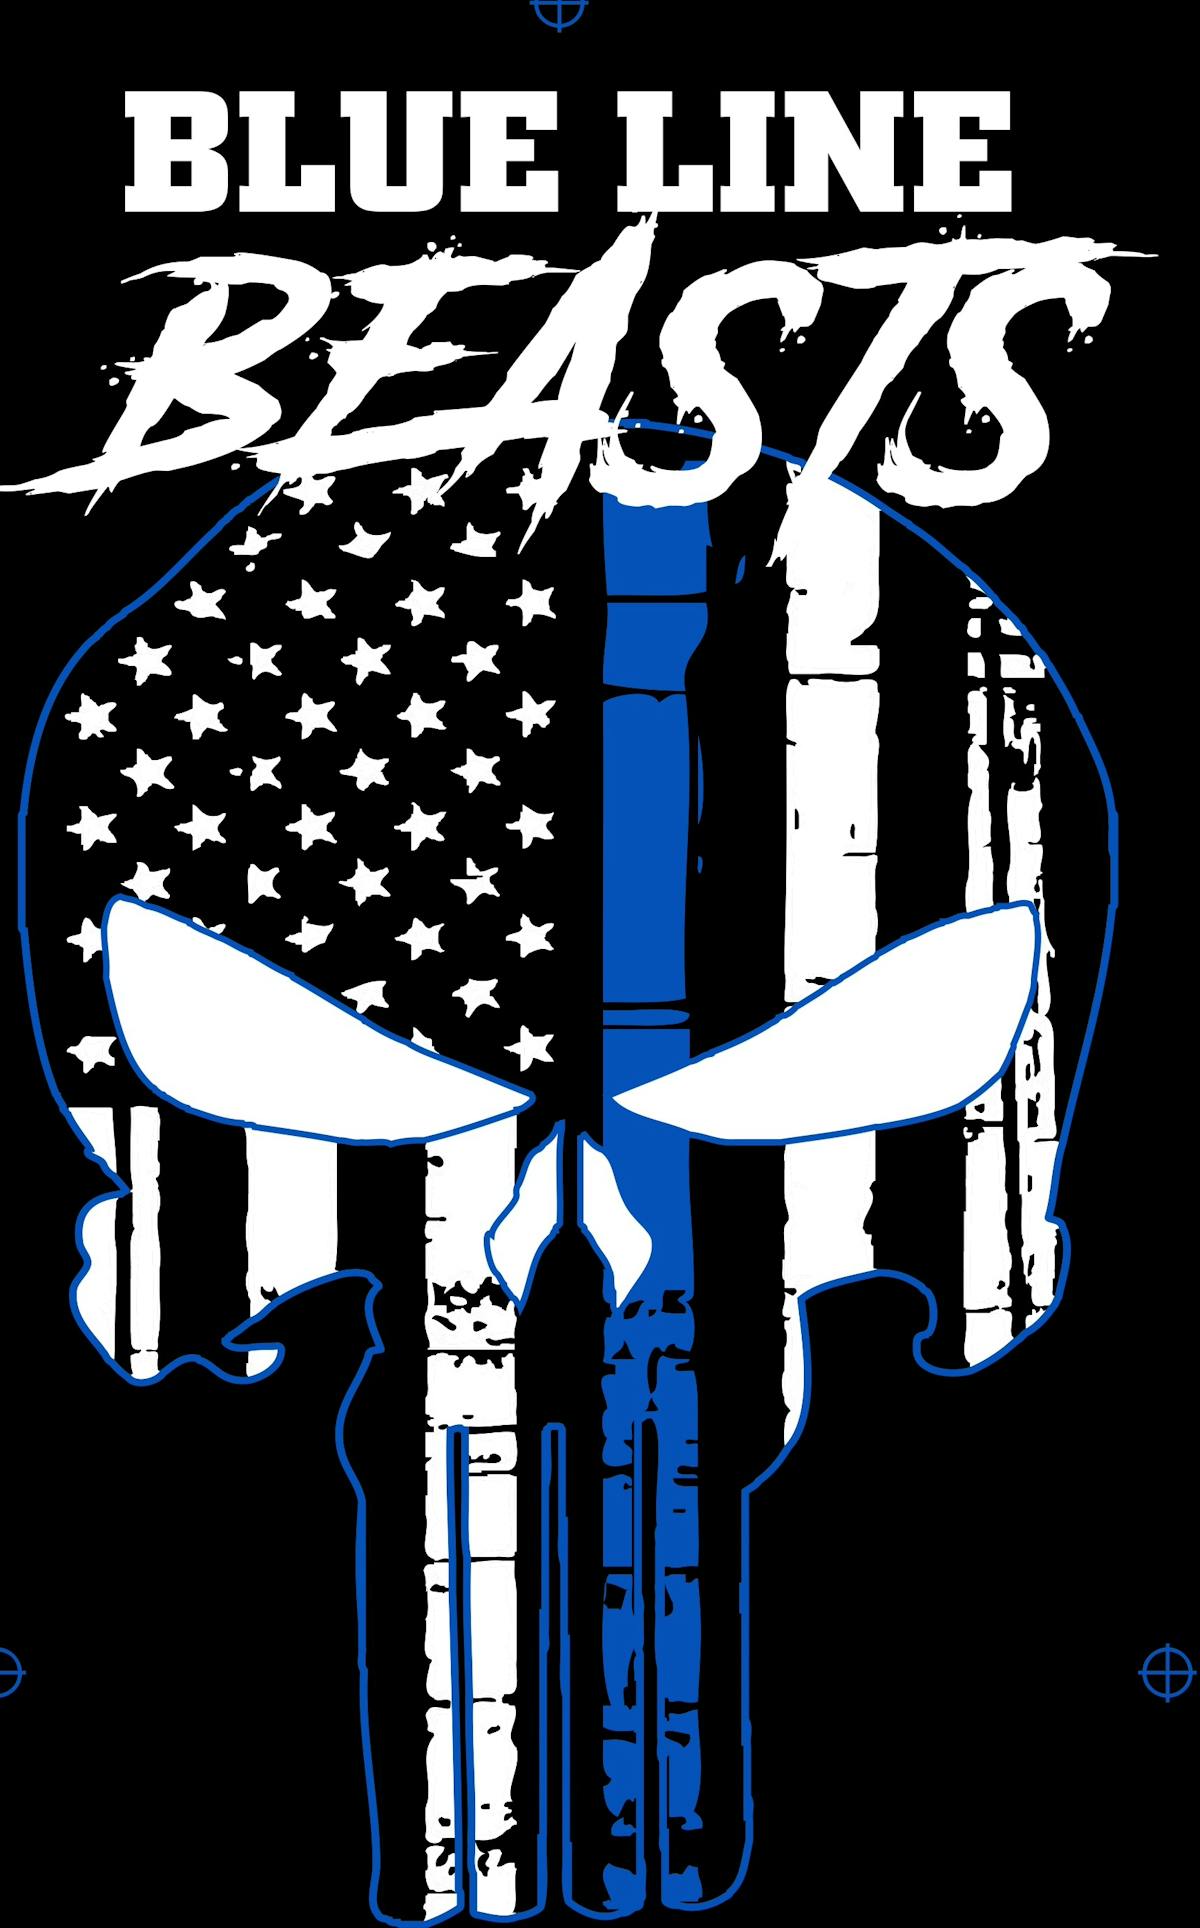 Blue Line Beasts Law Enforcement Crossfit Fitness Apparel and Thin Blue Line  Products